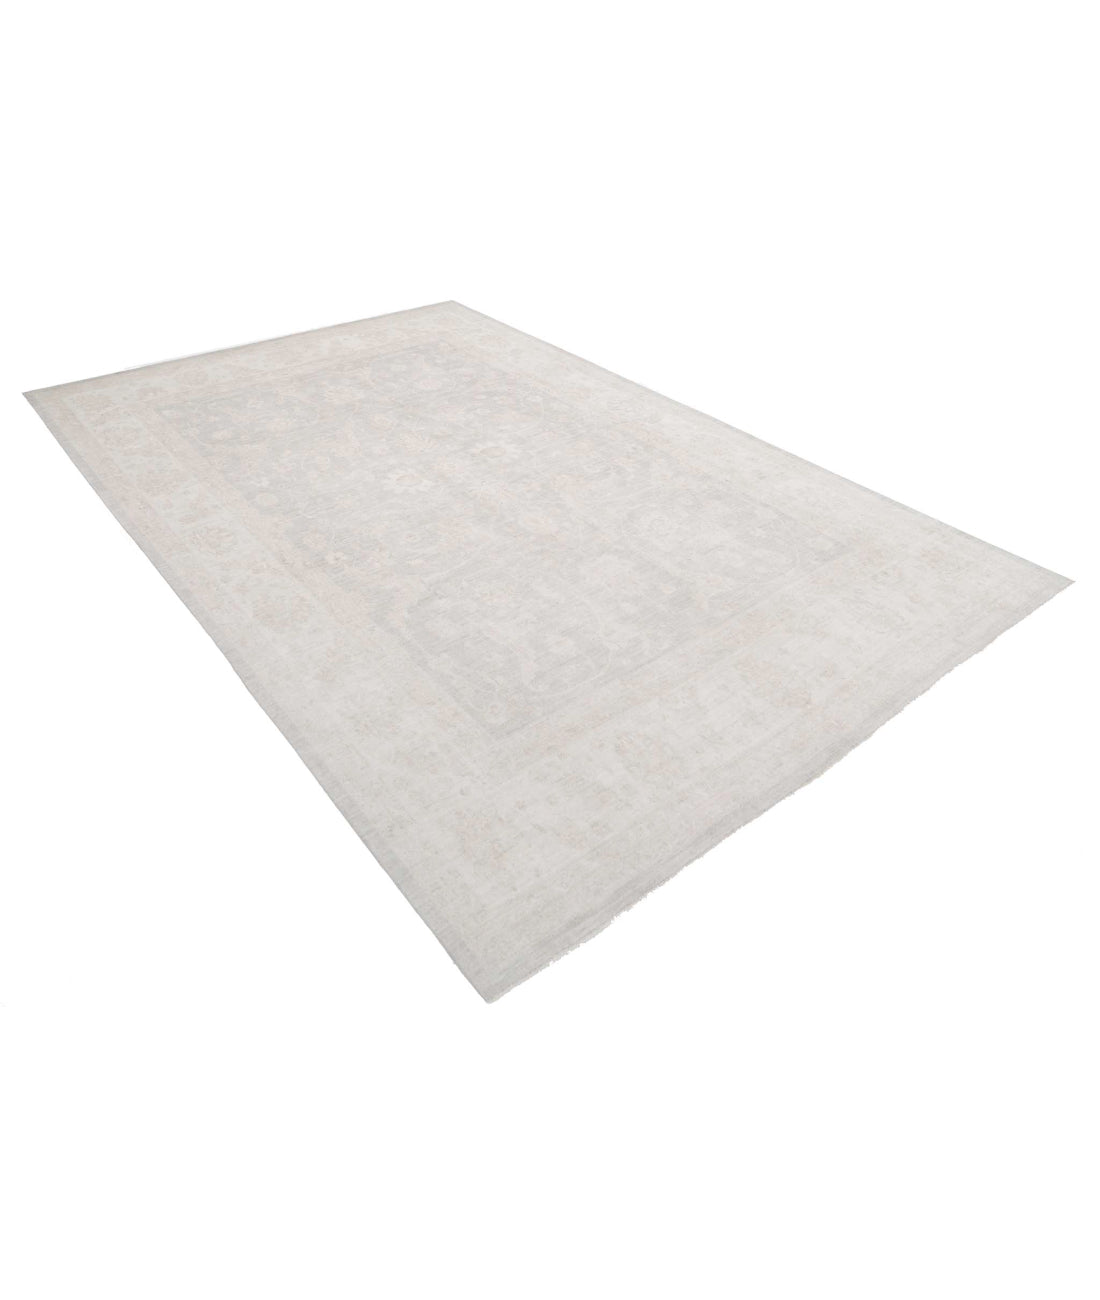 Serenity 12'1'' X 14'2'' Hand-Knotted Wool Rug 12'1'' x 14'2'' (363 X 425) / Grey / Ivory